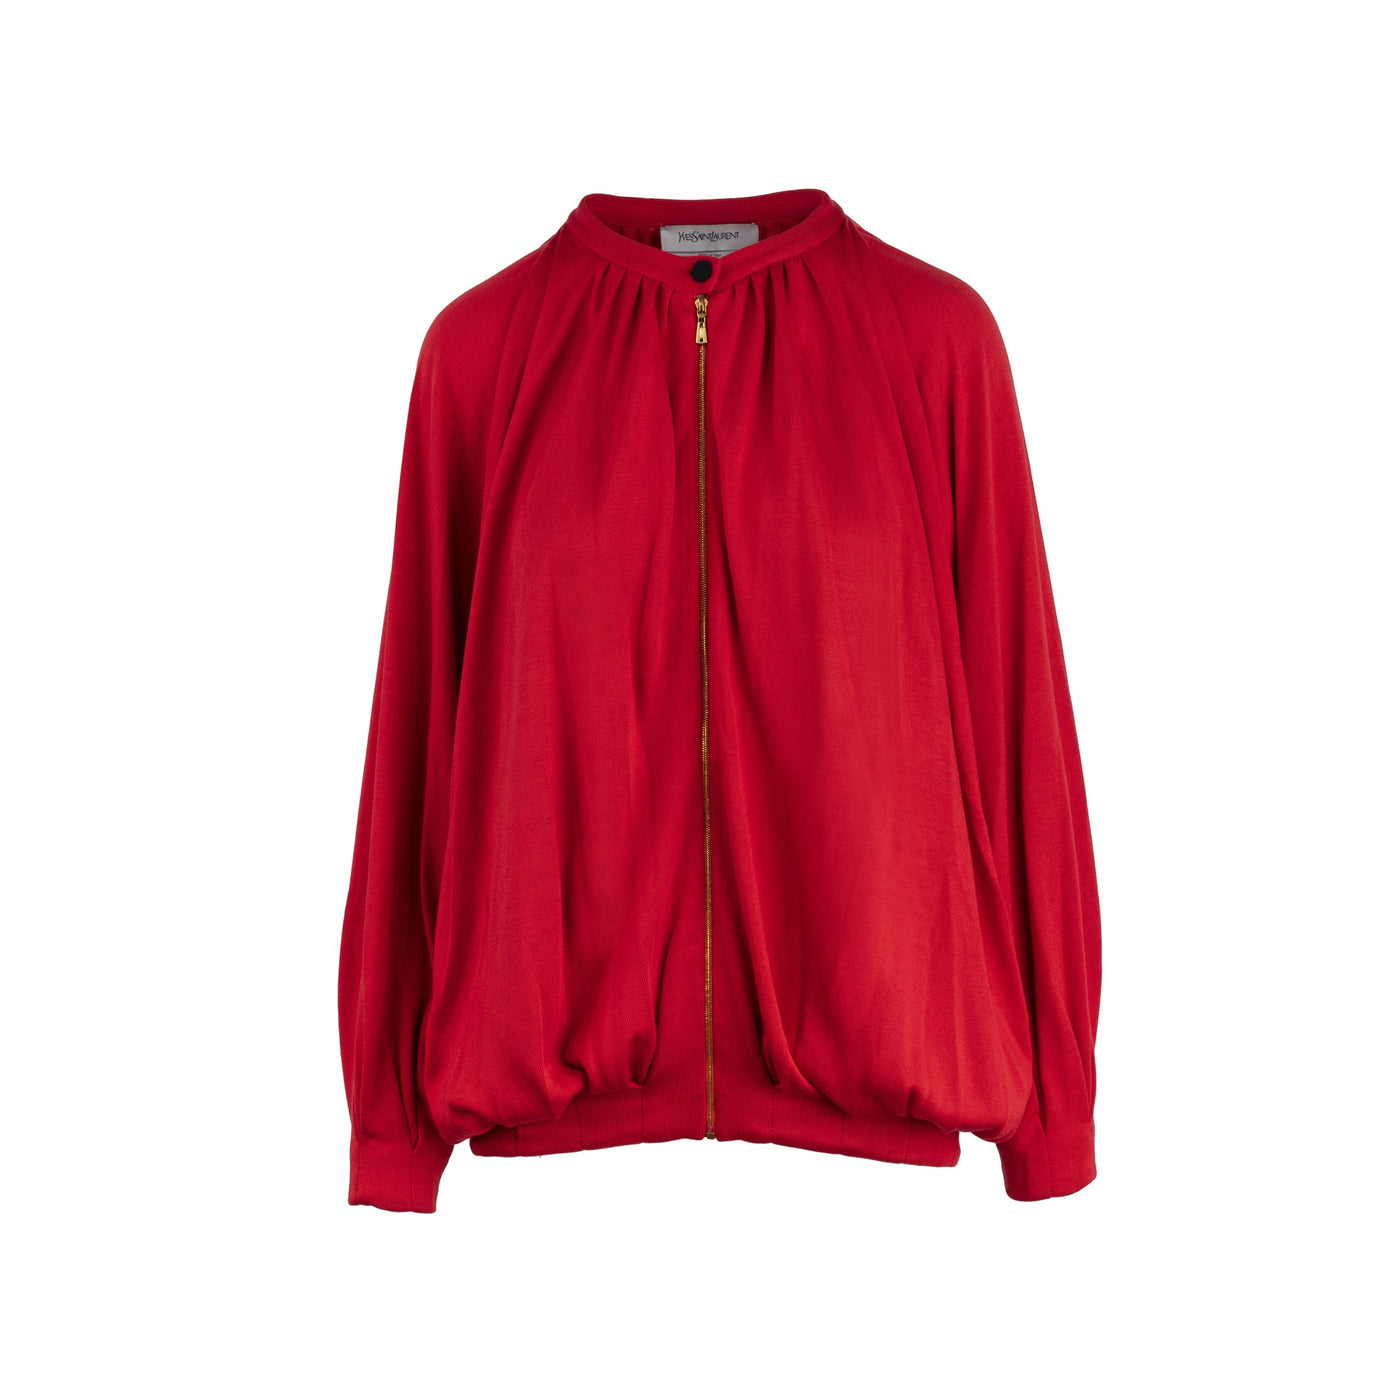 Yves Saint Laurent red silk and cotton bomber jacket, oversized fit with wide sleeves, crew neck decorated with a black button and central zip pre-owned